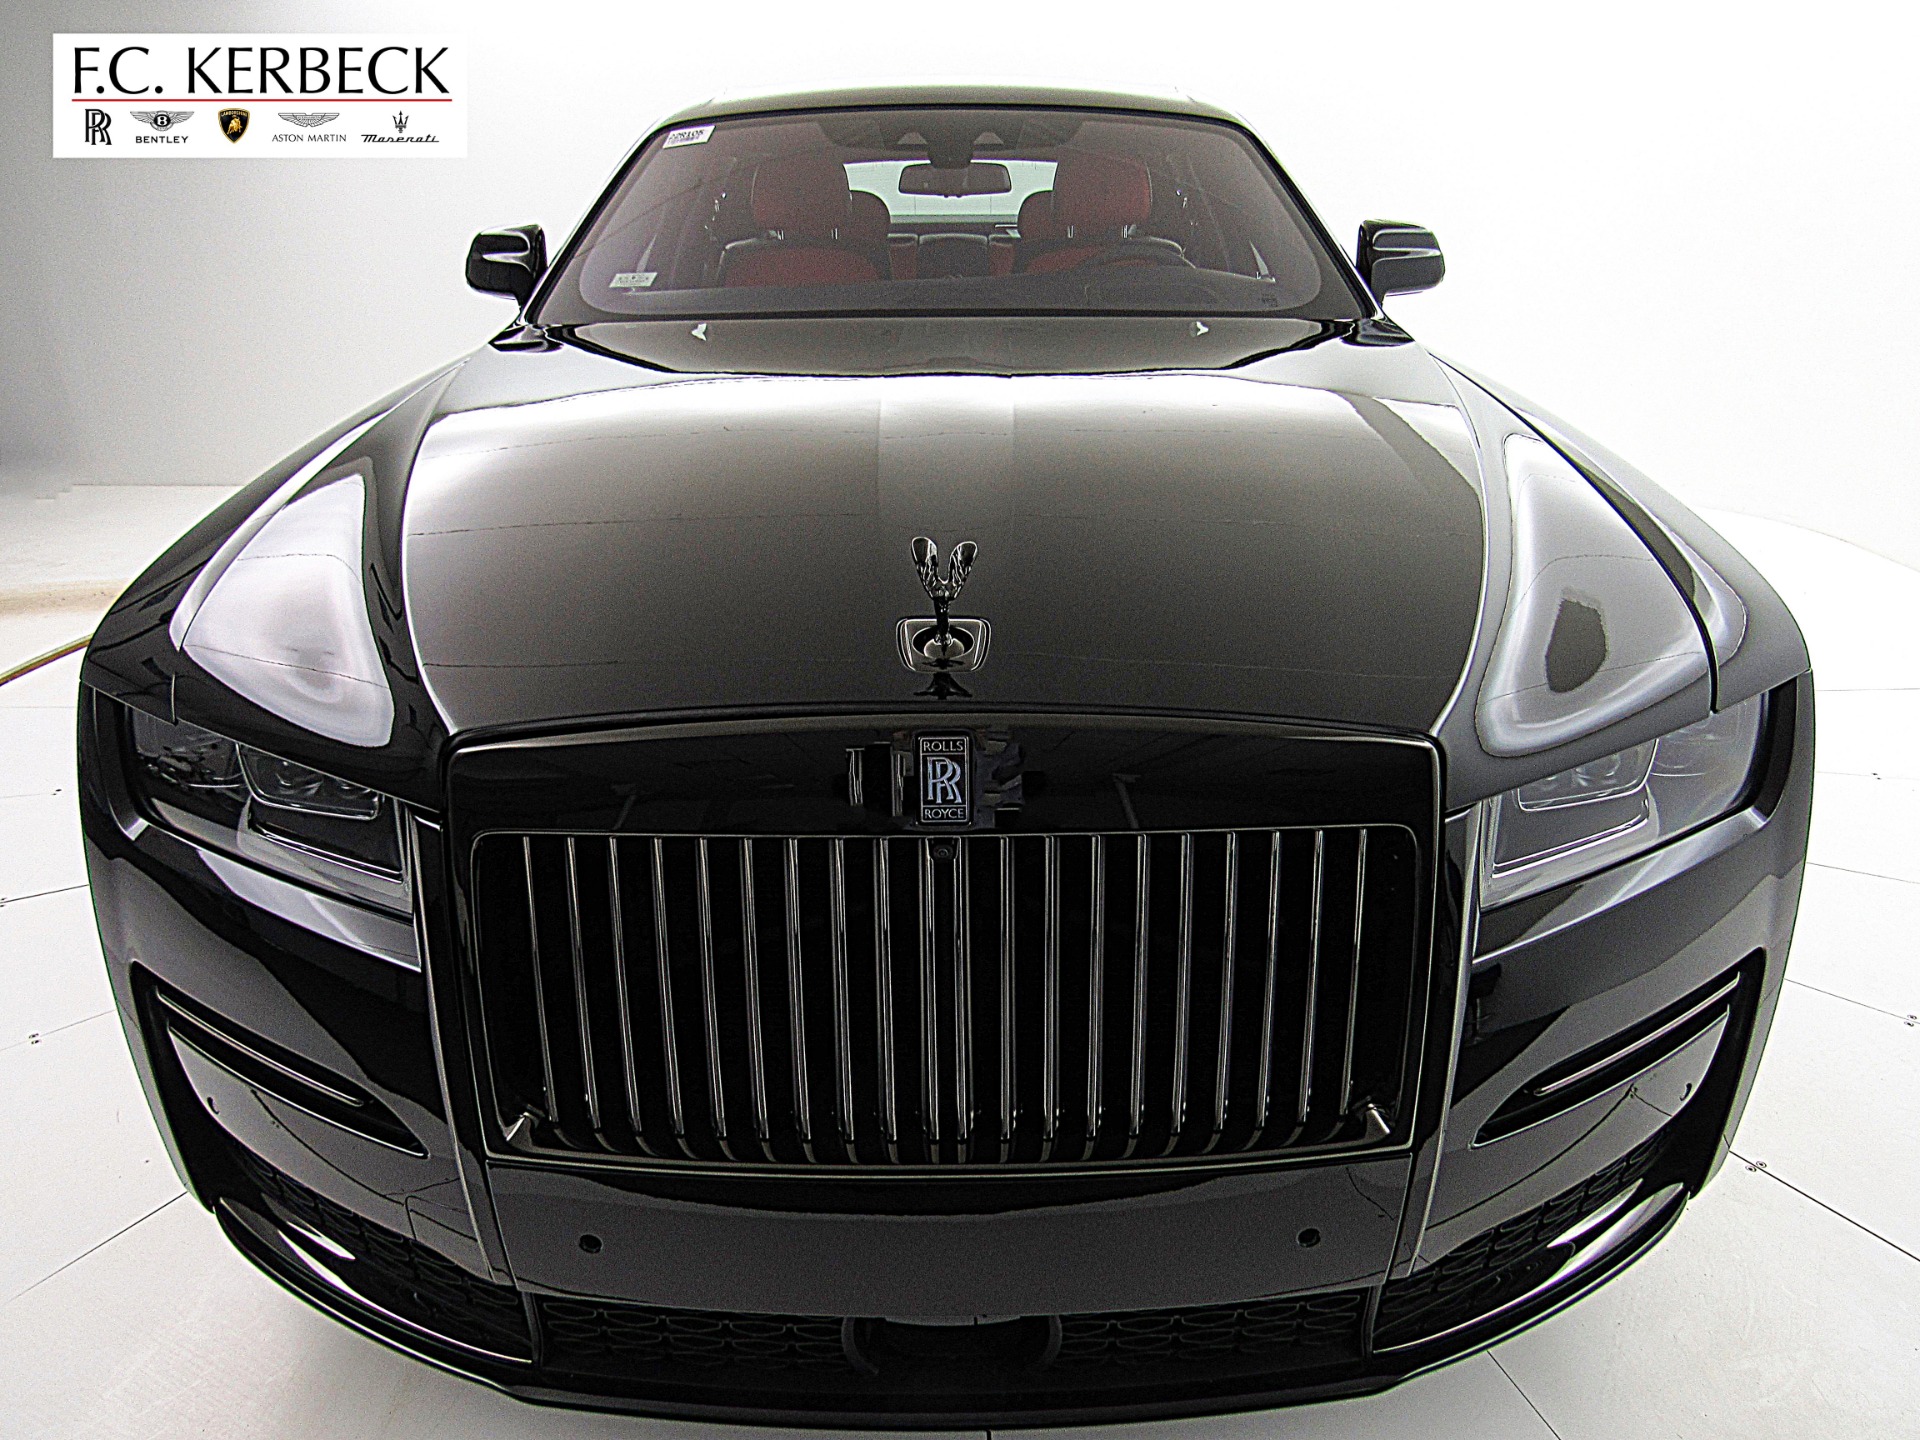 Full vehicle details of 2022 Rolls-Royce Ghost Black Badge Ghost Arctic  White Arctic White Black Badge Technical Fibre Veneer available for sale at  Rolls-Royce Motor Cars Tokyo 4-1 Kioi-Cho,Chiyoda-Ku,Tokyo 102-0094 for €0